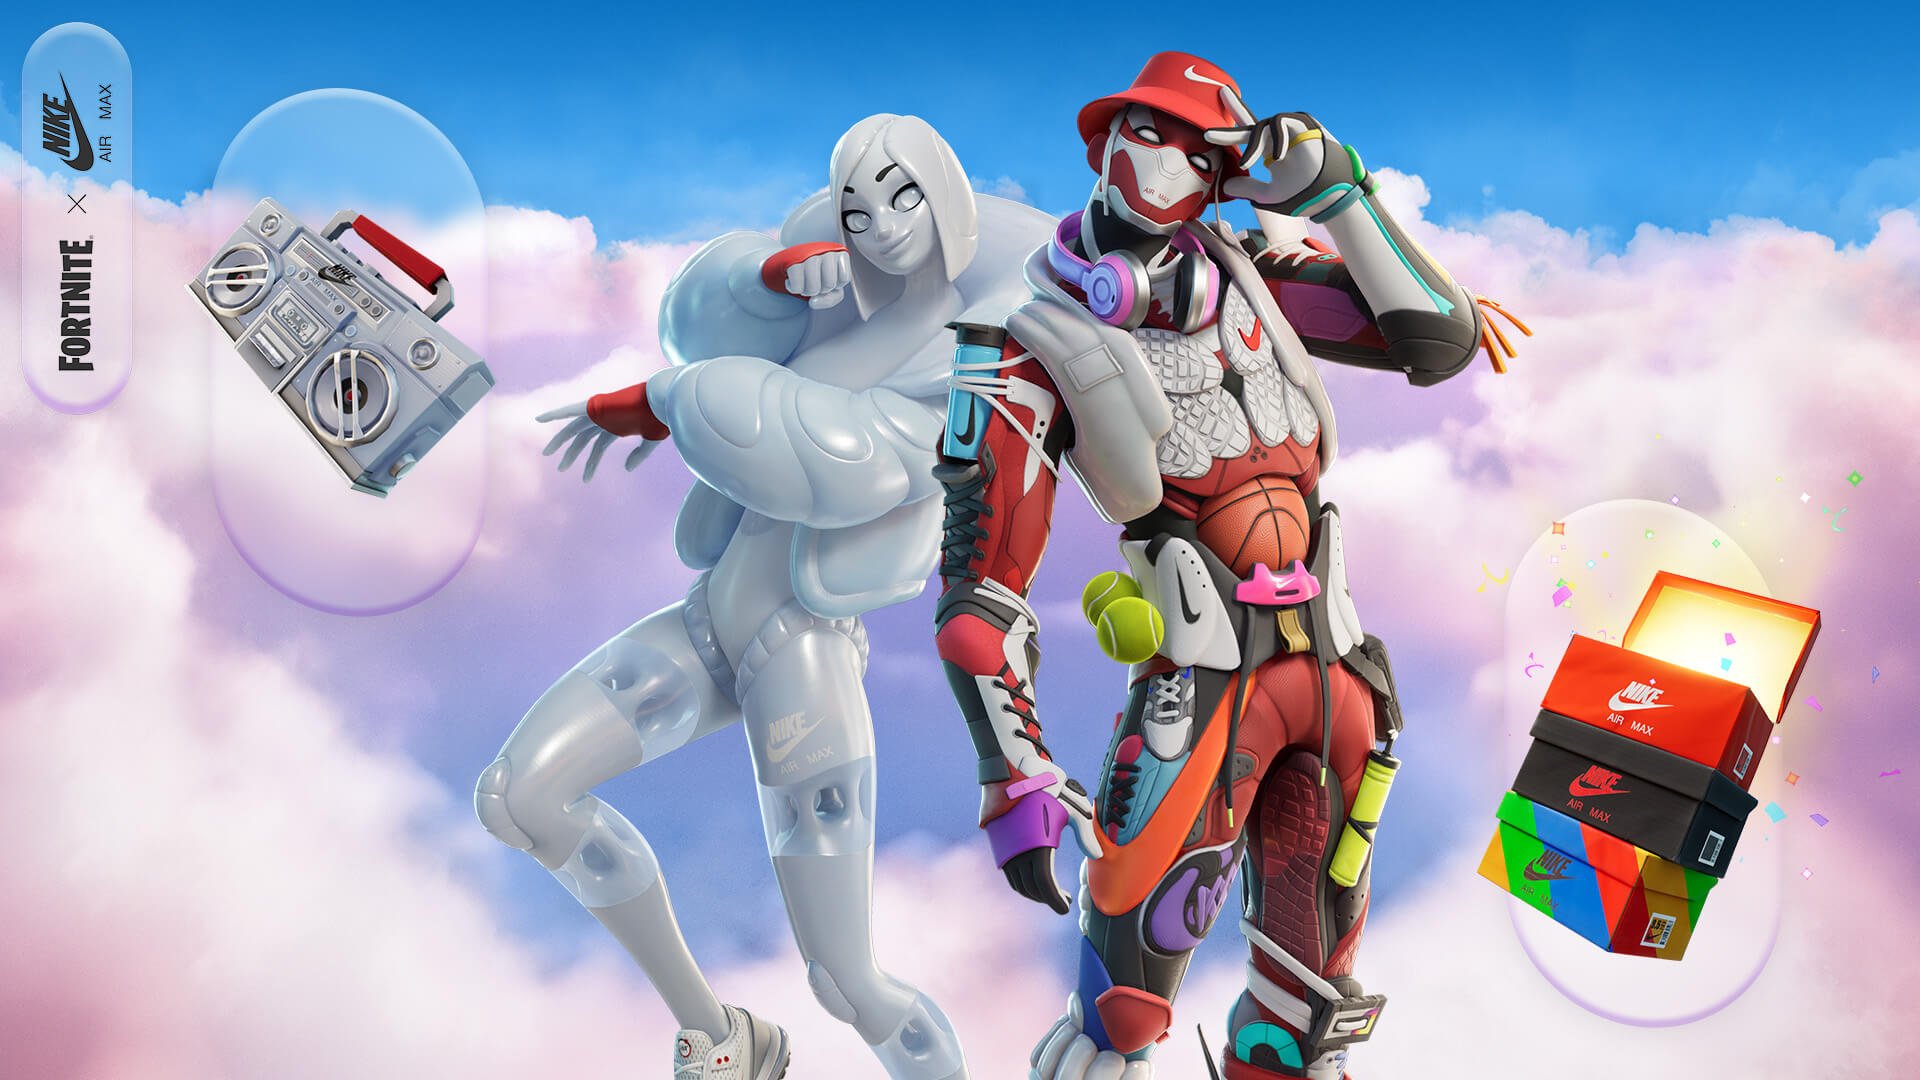 digital poster of two robotic characters from the Nike Airphoria digital universe on a clouds background